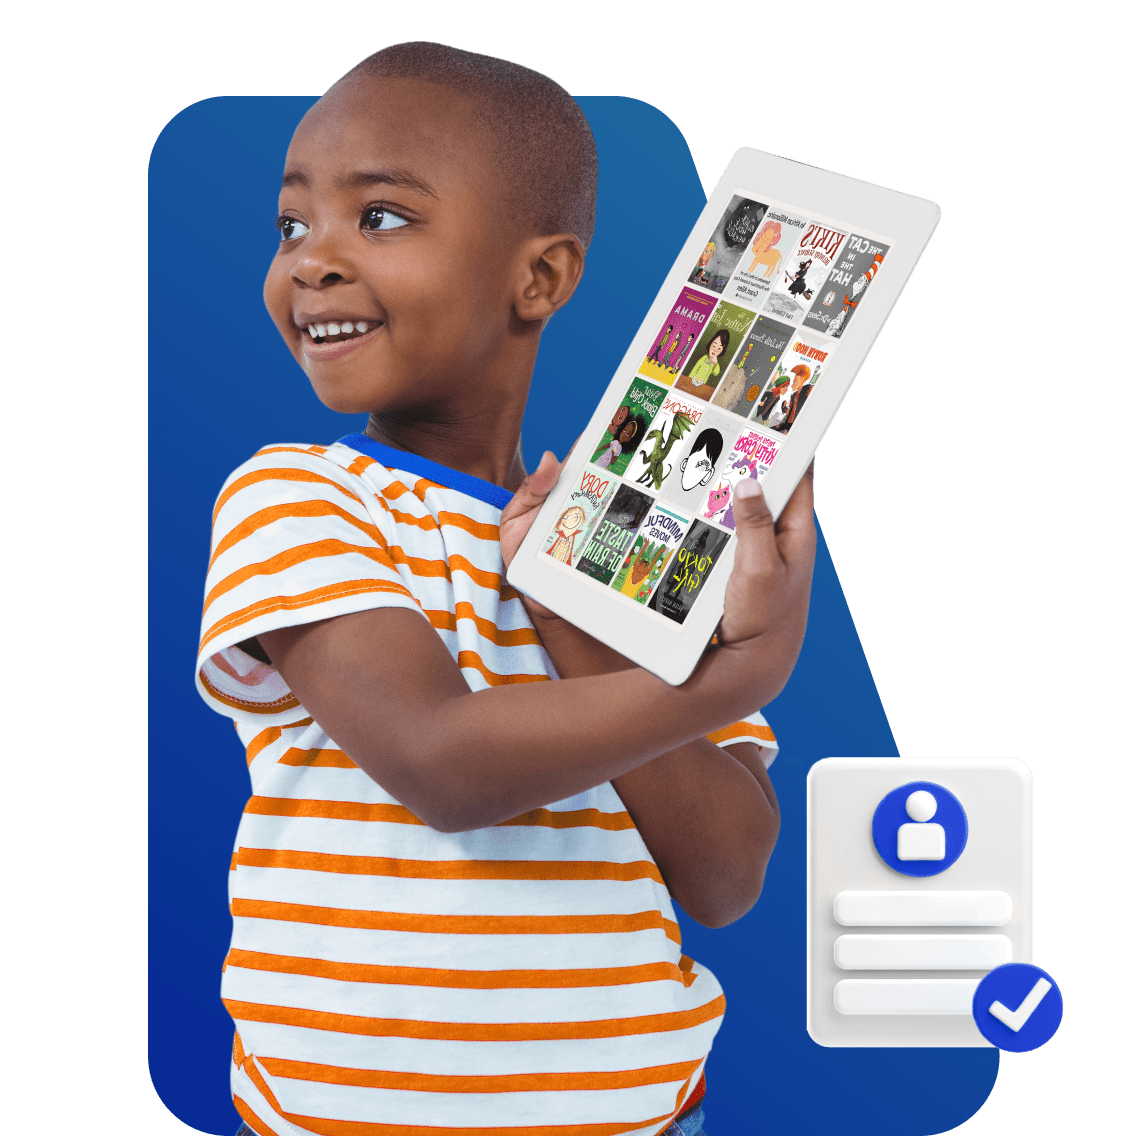 Types of Home-schoolers and Online Learners image 2 (name 1 Young Boy Tablet Certificate)